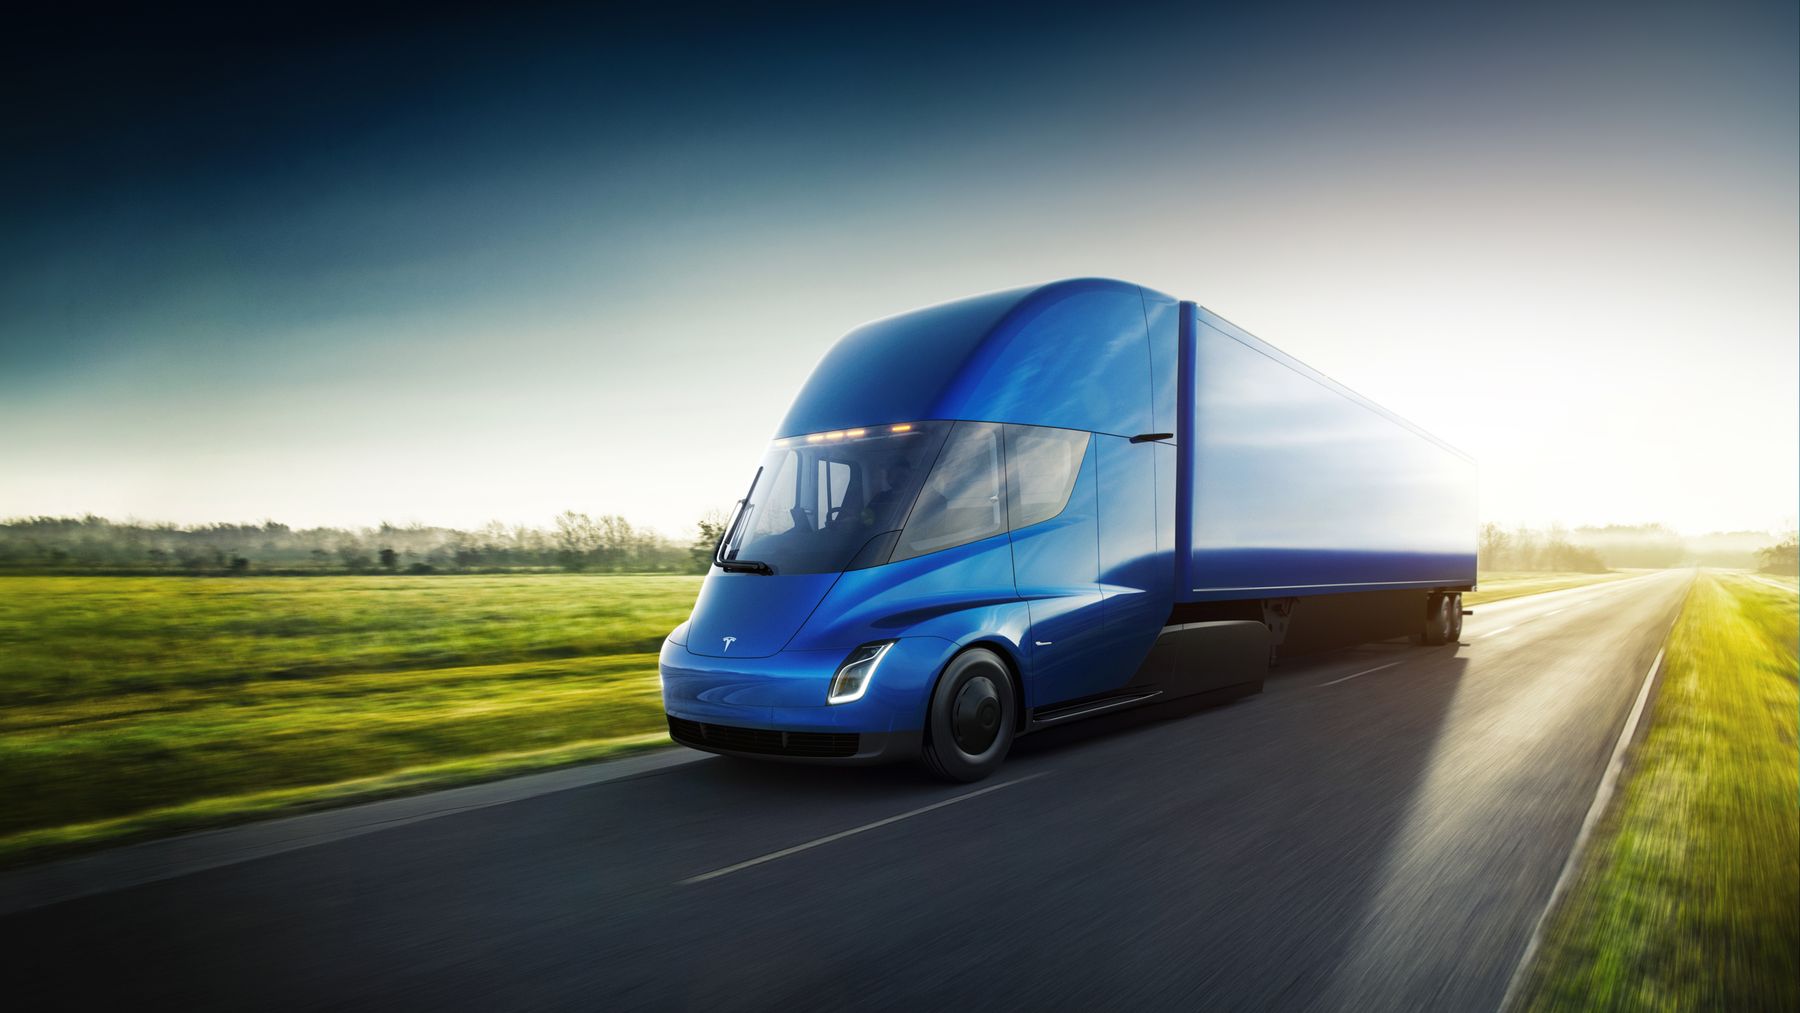 Tesla’s New Semi Truck is Here, and it Has a Tremendous 500-Mile Range1800 x 1013